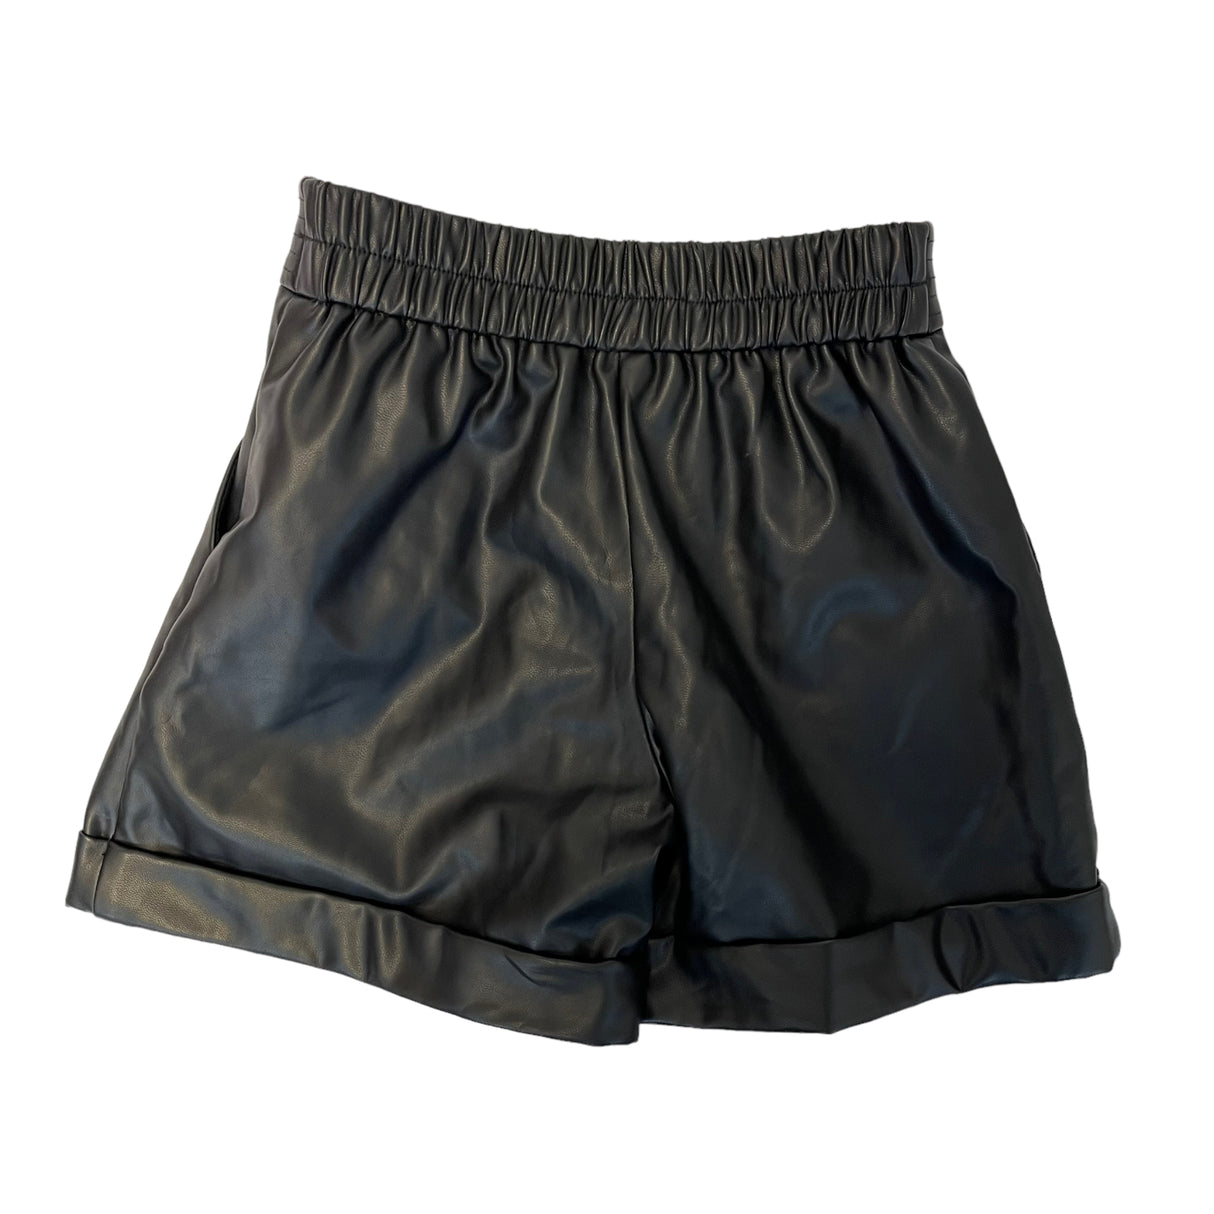 A Second Chance - Zara Kids 7 Leather Short - Delivery All Over Lebanon Lebanon